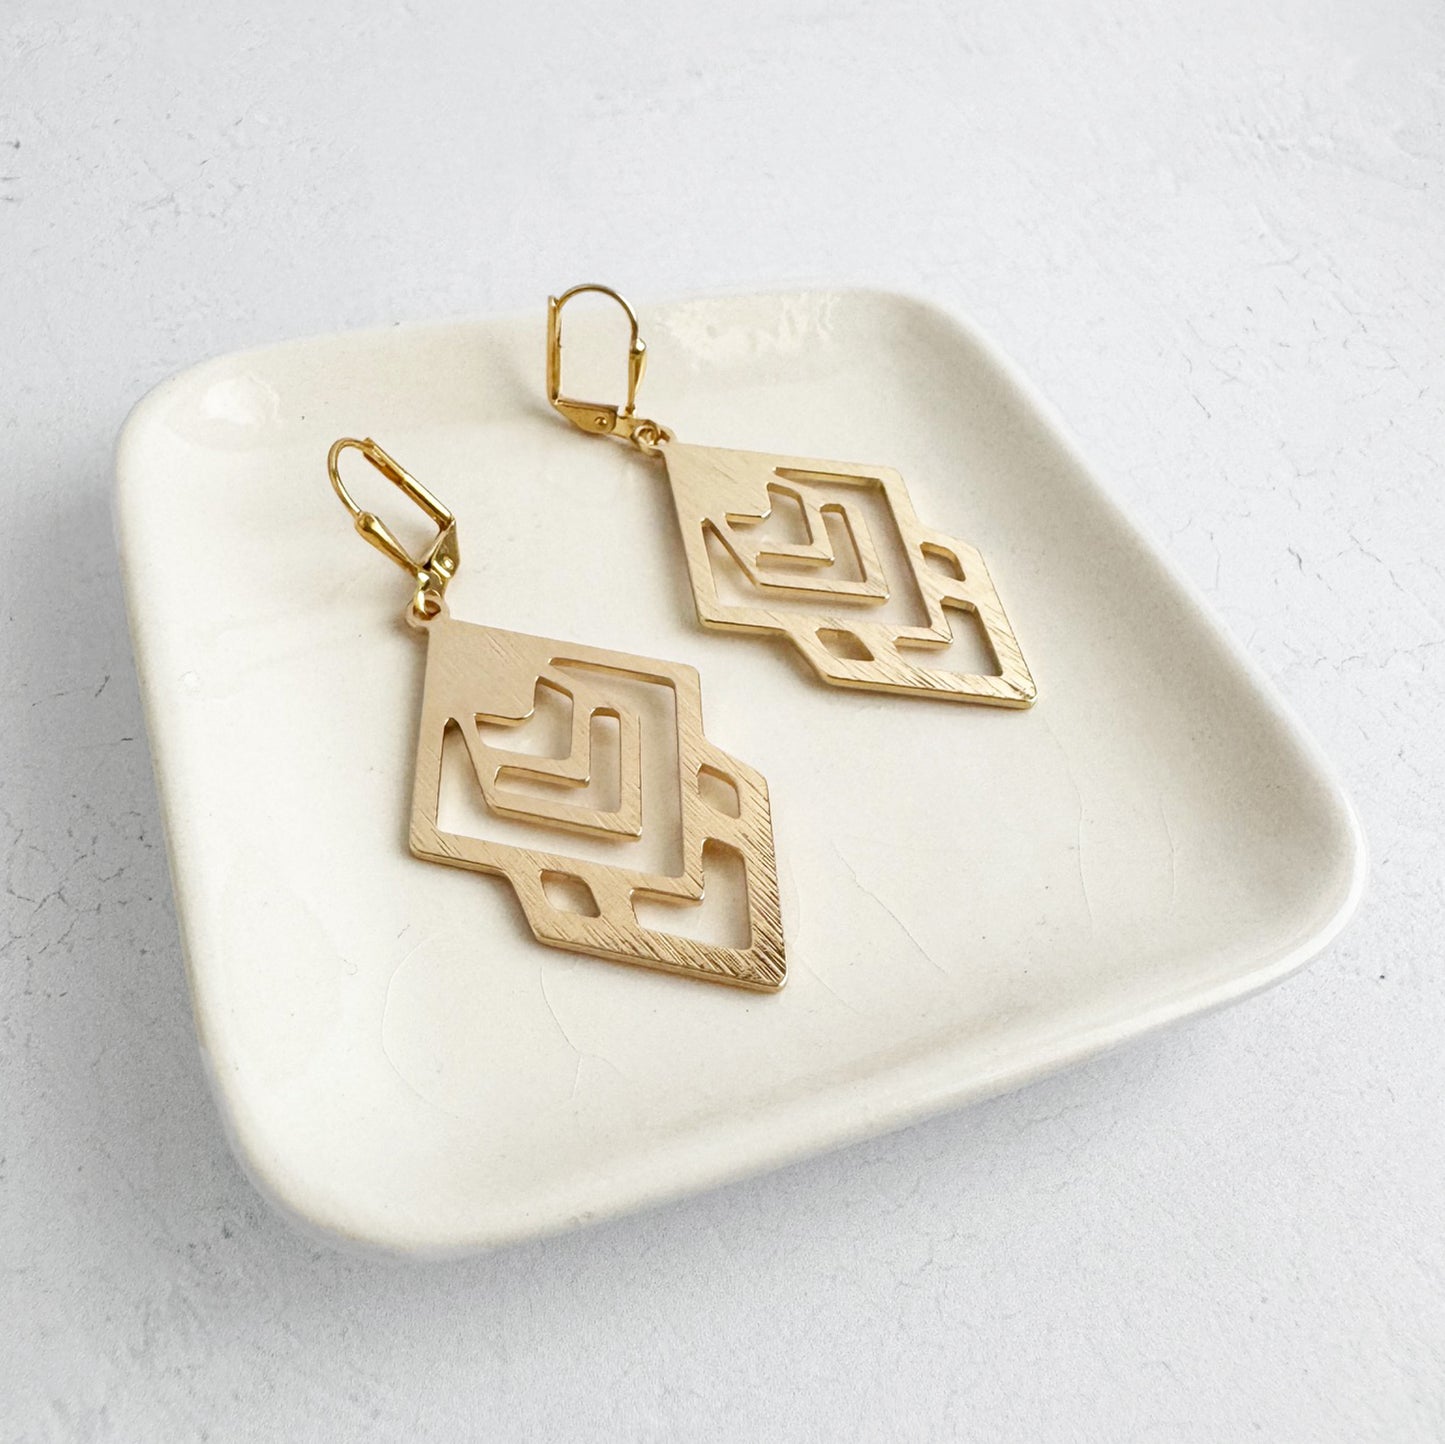 Abstract Geometric Dangle Earrings in Brushed Gold